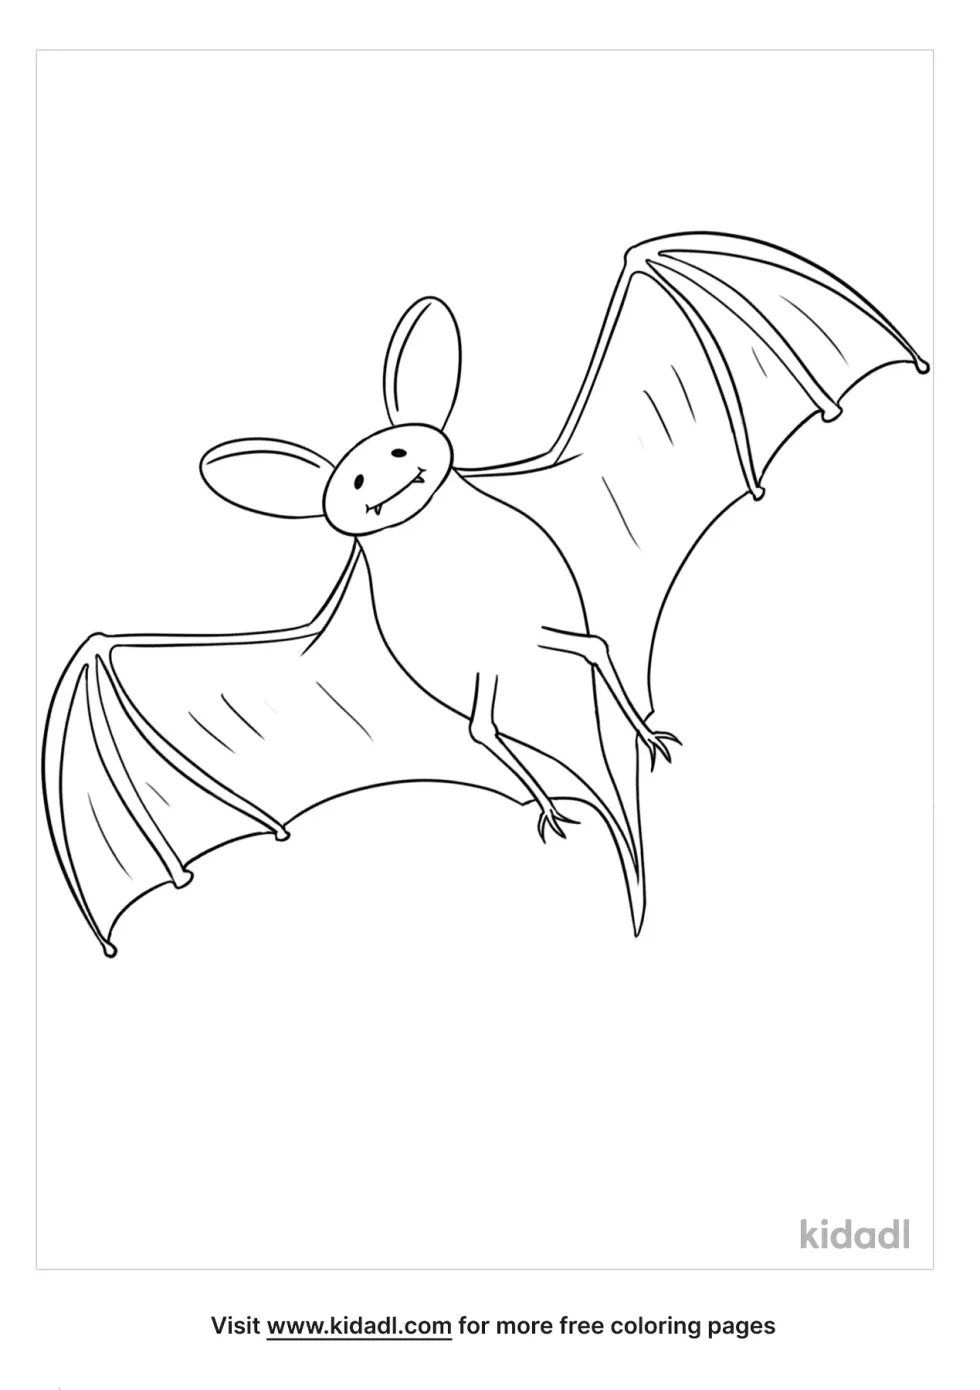 Flying Bat Outline Coloring Page